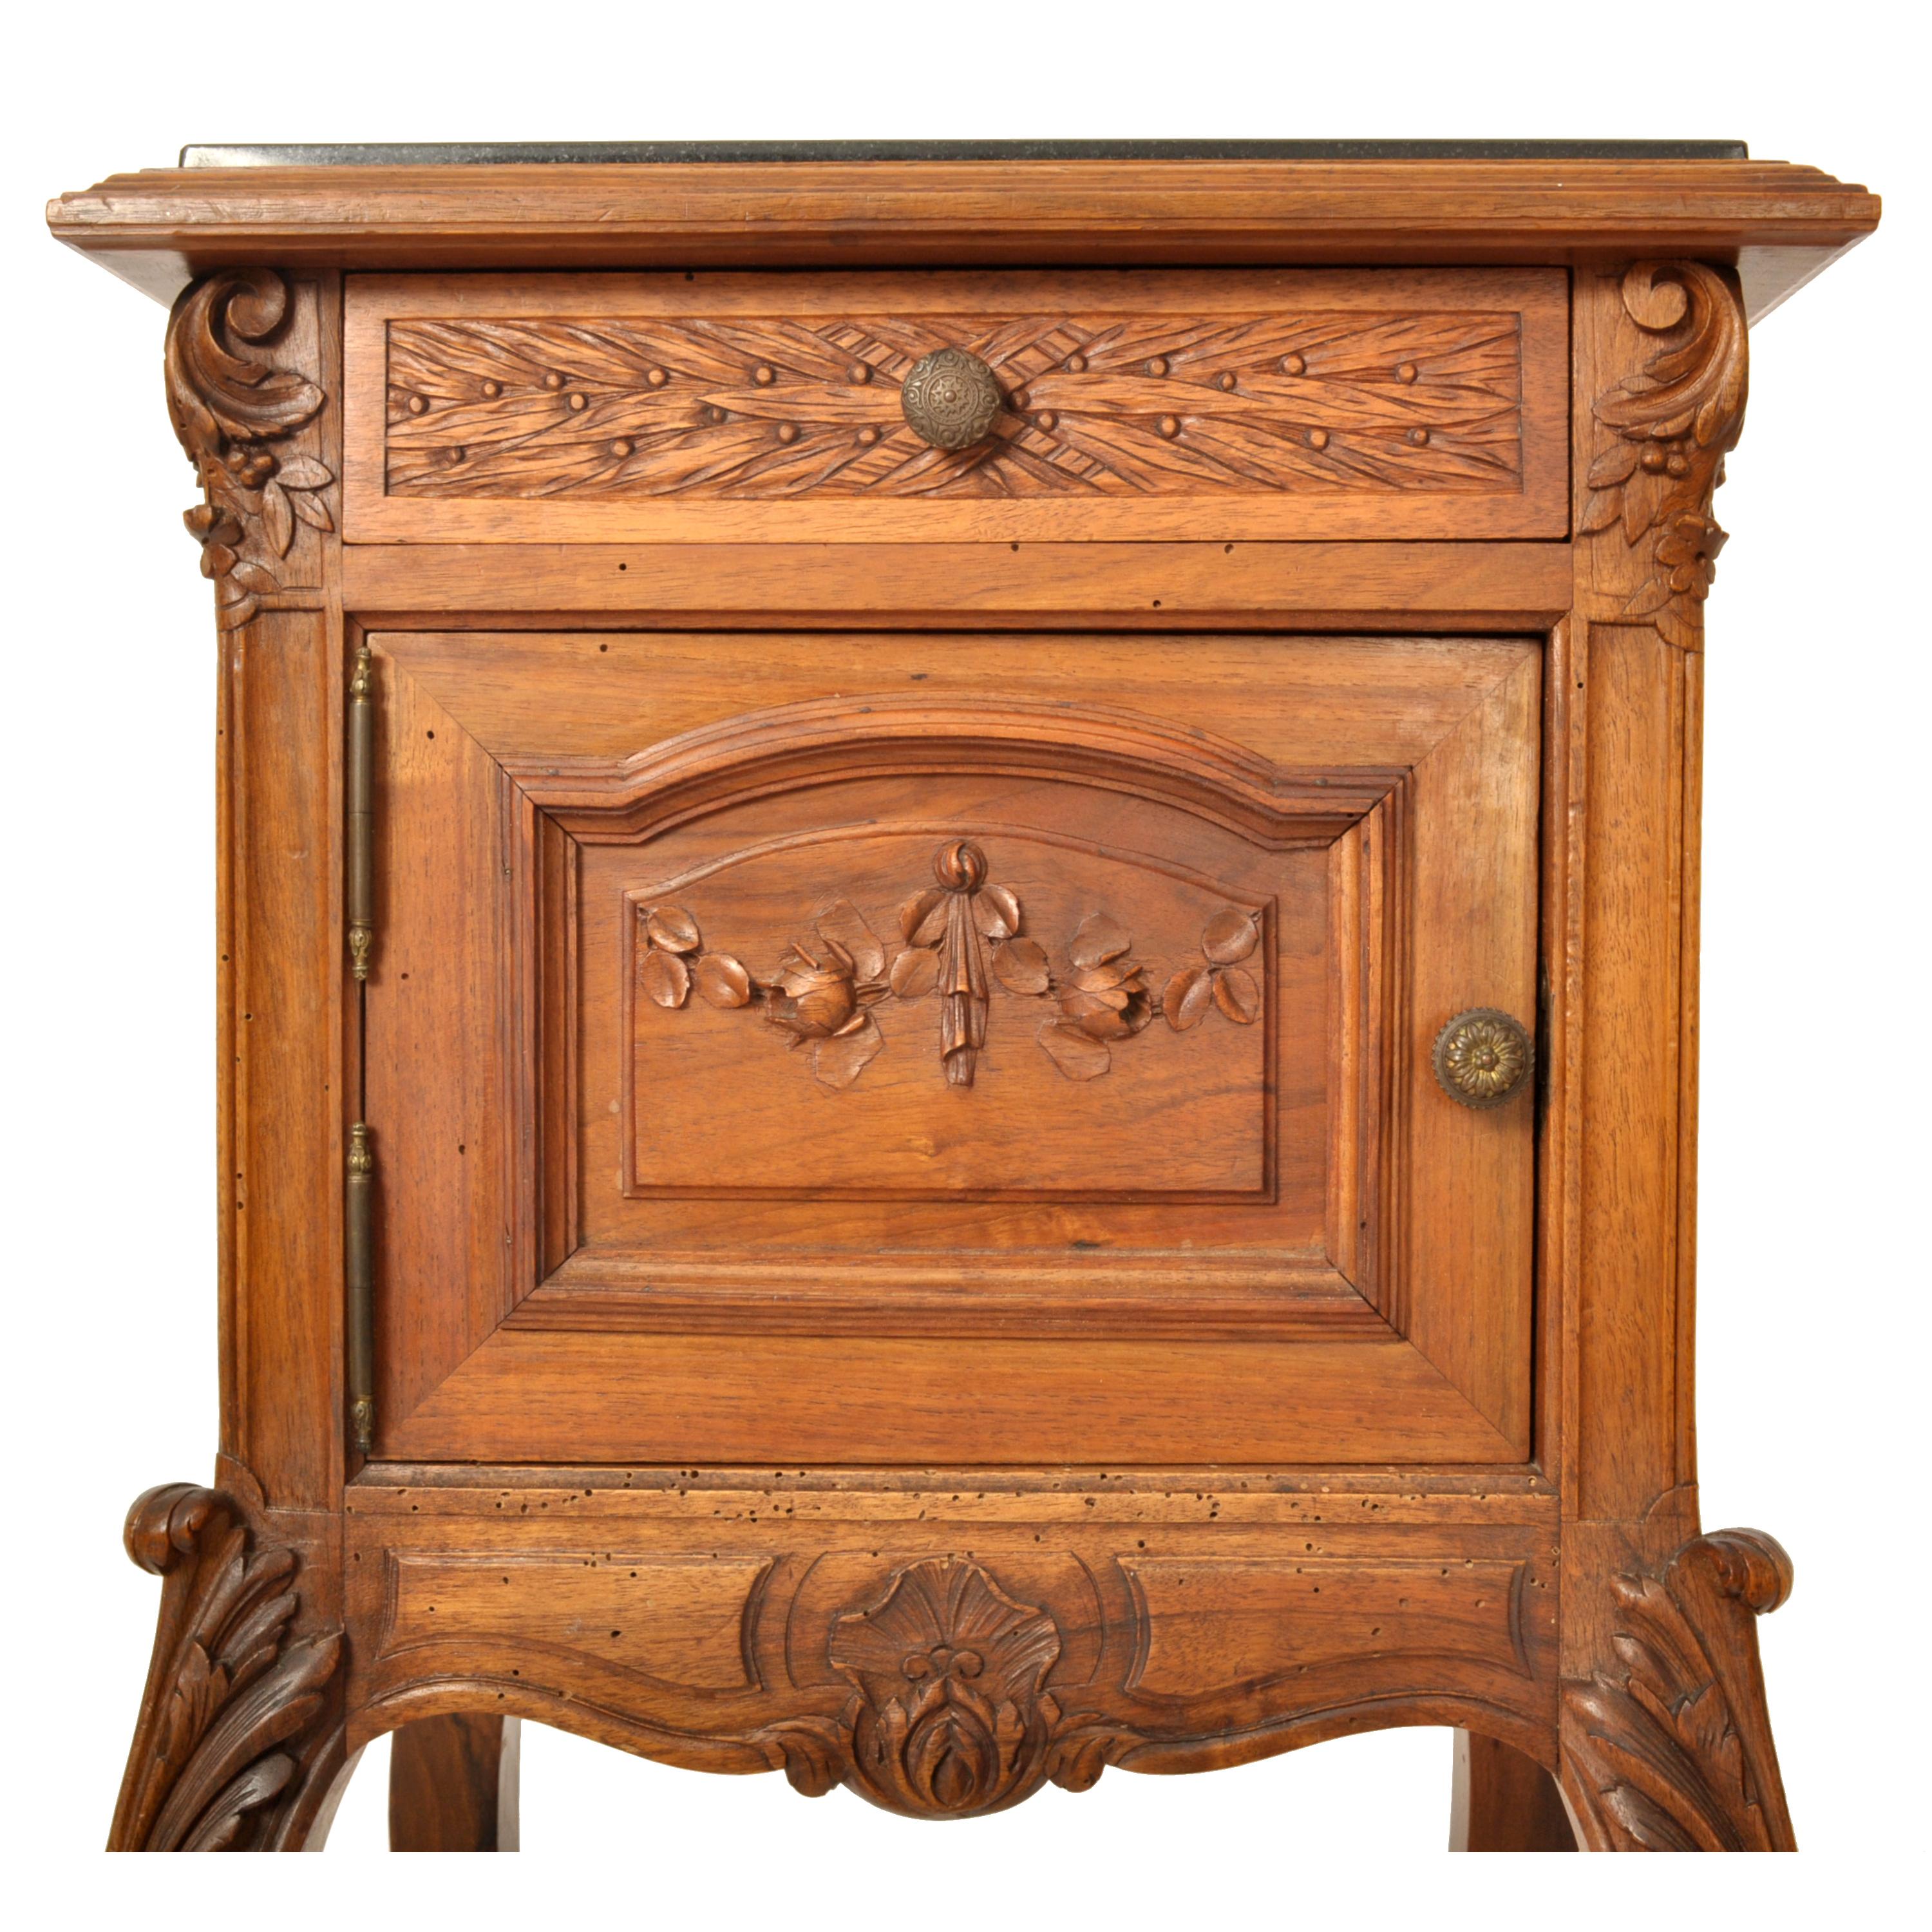 Antique French Provincial Louis XVI Carved Walnut & Marble Nightstand Table 1880 For Sale 7